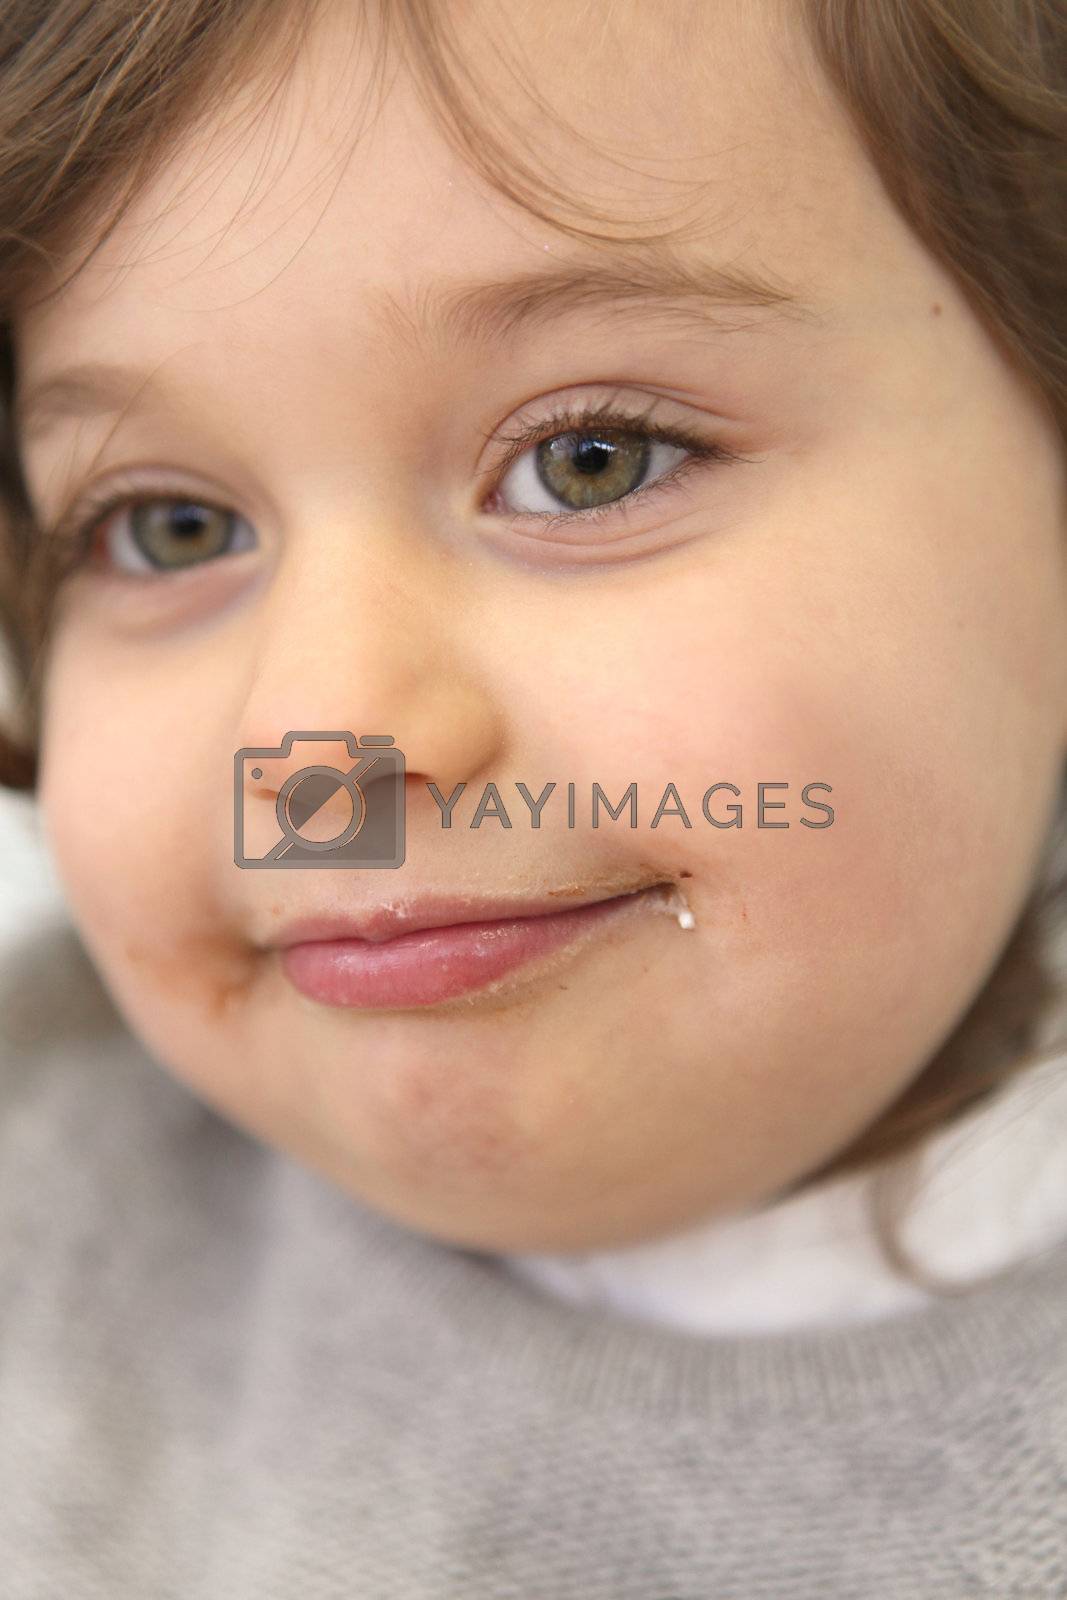 Royalty free image of Close-up shot of little girl by phovoir